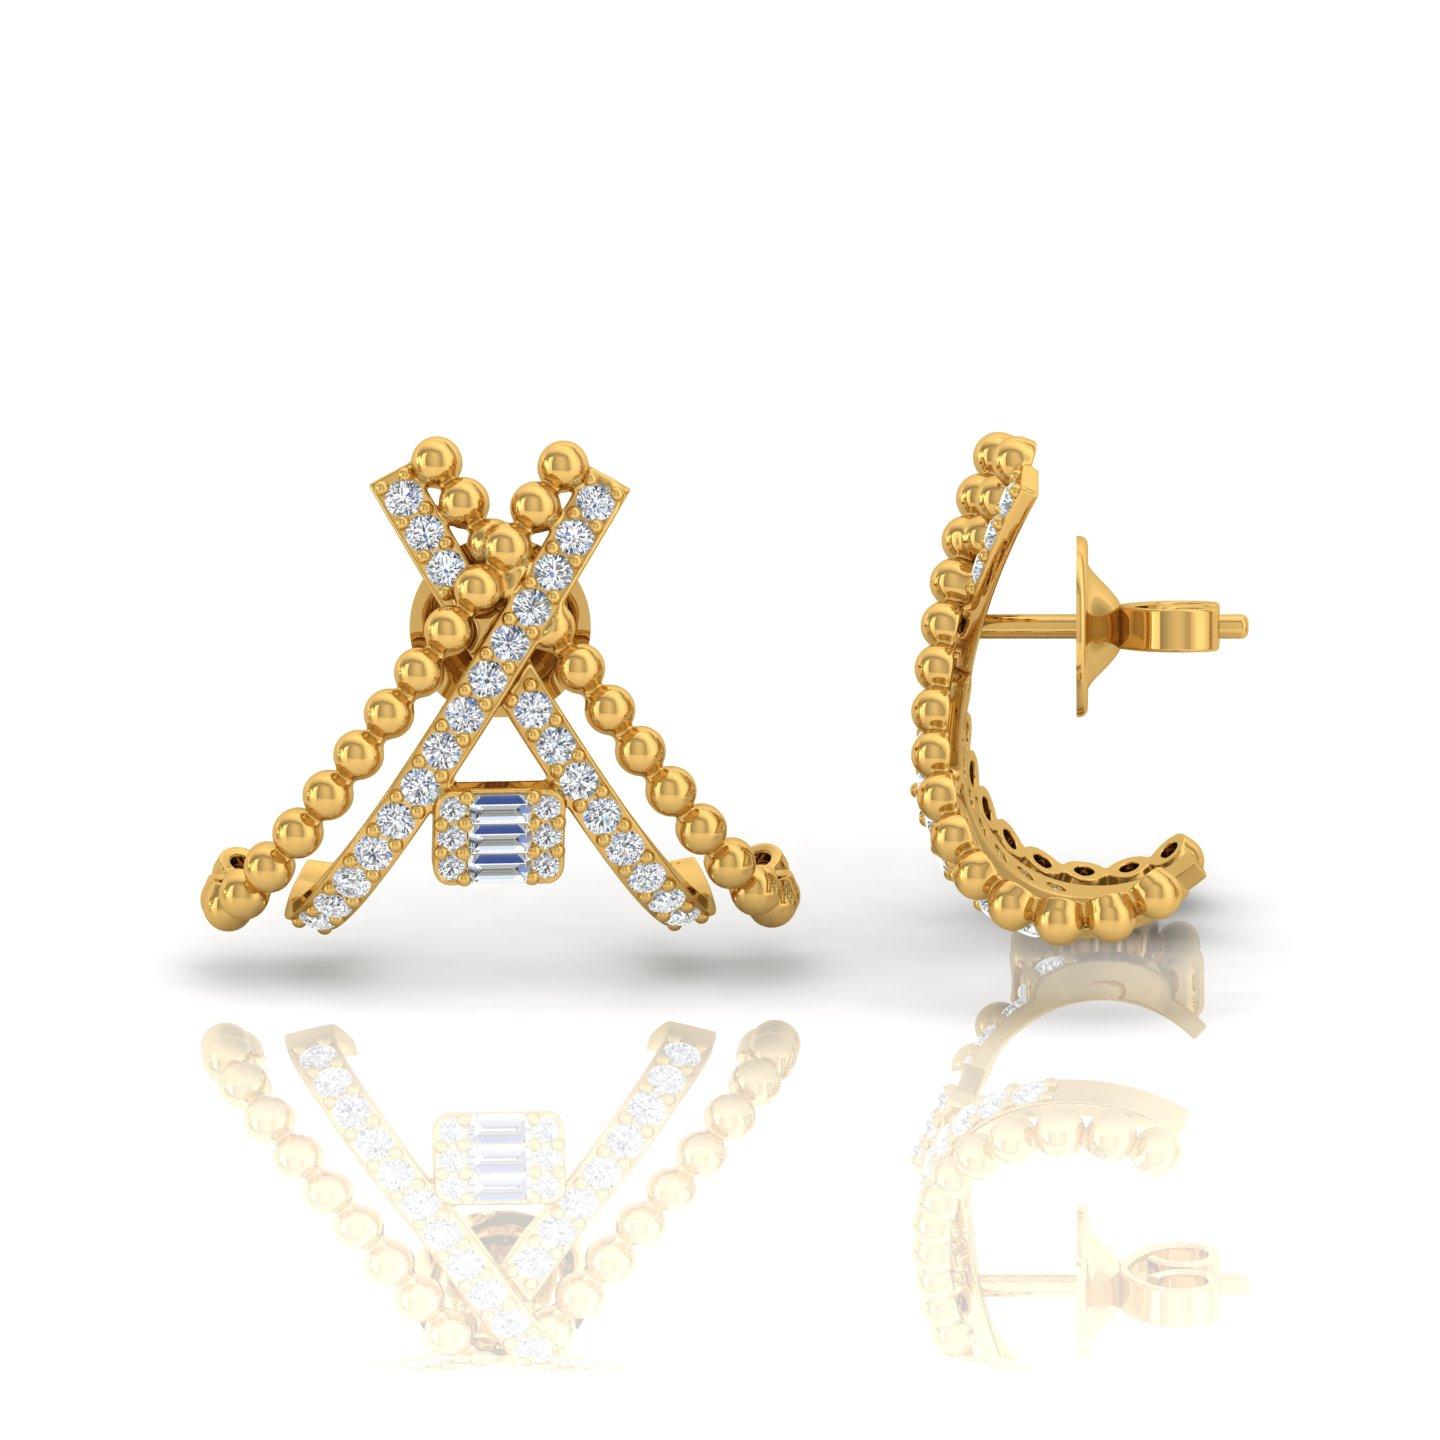 Item Code :- CN-32432
Gross Wt. :- 6.98 gm
18k Solid Yellow Gold Wt. :- 6.79 gm
Natural Diamond Wt. :- 0.96 Ct. ( AVERAGE DIAMOND CLARITY SI1-SI2 & COLOR H-I )
Earrings Size :- 20 x 24 mm approx.

✦ Sizing
.....................
We can adjust most